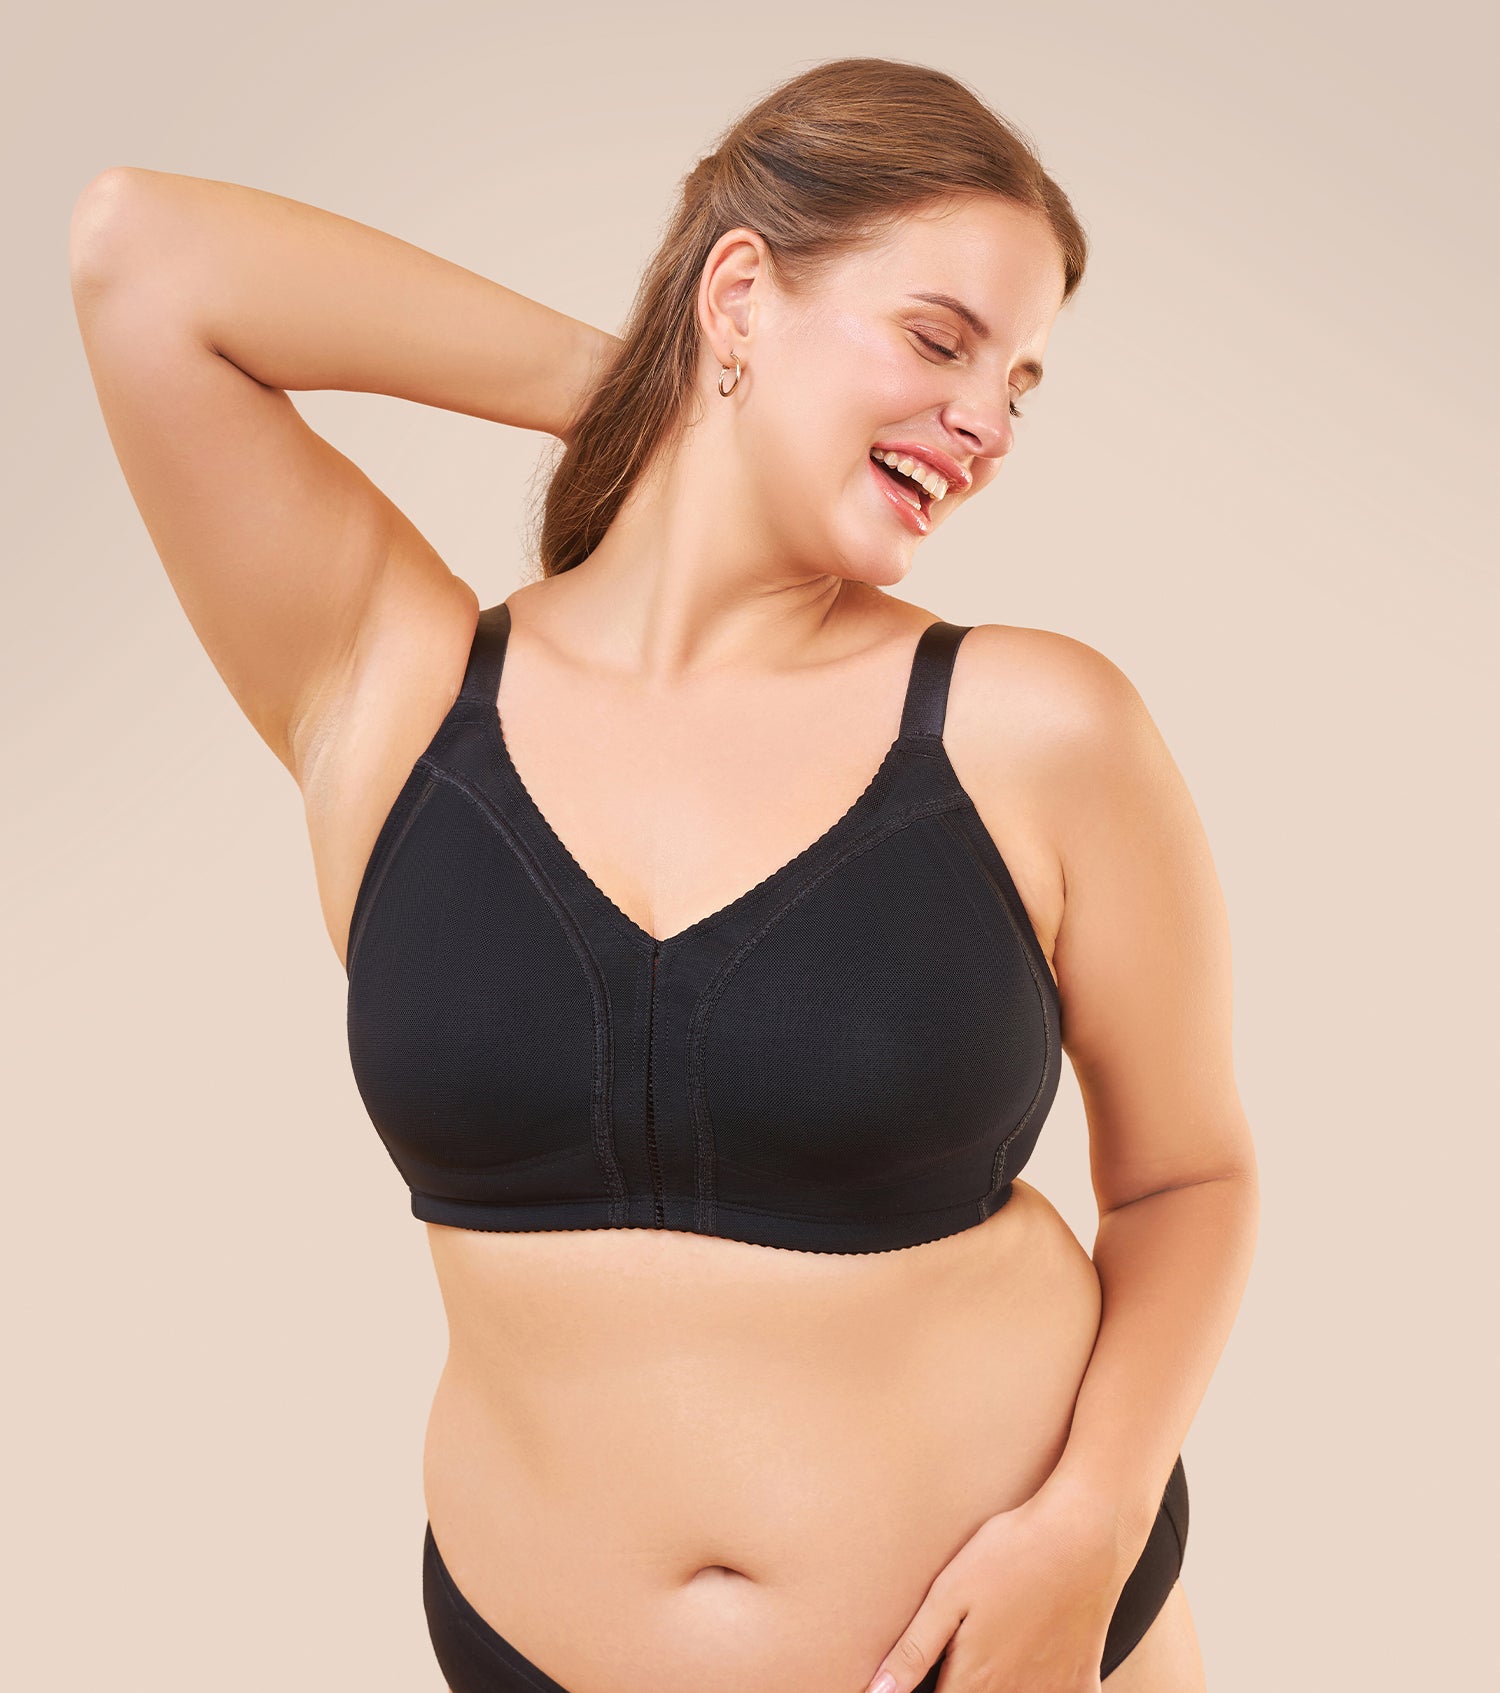 Enamor Body Transform F097 Smooth Contour Lift Bra for Women- Full Coverage, Non Padded and Wirefree - Black